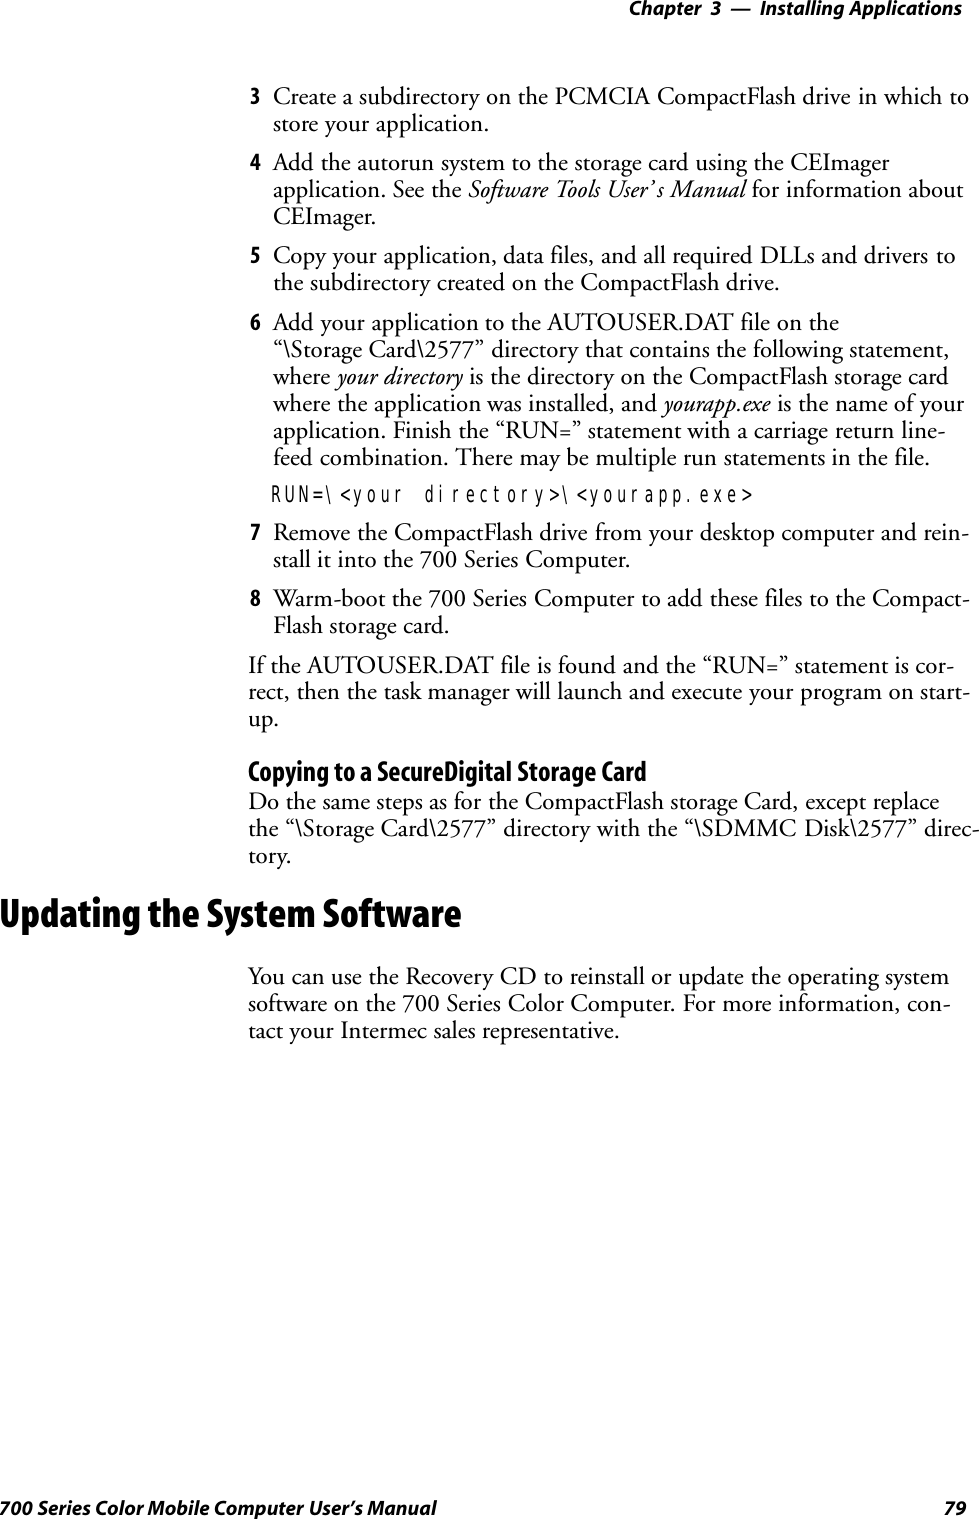 Installing Applications—Chapter 379700 Series Color Mobile Computer User’s Manual3Create a subdirectory on the PCMCIA CompactFlash drive in which tostore your application.4Add the autorun system to the storage card using the CEImagerapplication. See the Software Tools User’ s Manual for information aboutCEImager.5Copy your application, data files, and all required DLLs and drivers tothe subdirectory created on the CompactFlash drive.6Add your application to the AUTOUSER.DAT file on the“\Storage Card\2577” directory that contains the following statement,where your directory is the directory on the CompactFlash storage cardwhere the application was installed, and yourapp.exe is the name of yourapplication. Finish the “RUN=” statement with a carriage return line-feed combination. There may be multiple run statements in the file.RUN=\&lt;your directory&gt;\&lt;yourapp.exe&gt;7Remove the CompactFlash drive from your desktop computer and rein-stall it into the 700 Series Computer.8Warm-boot the 700 Series Computer to add these files to the Compact-Flash storage card.If the AUTOUSER.DAT file is found and the “RUN=” statement is cor-rect, then the task manager will launch and execute your program on start-up.Copying to a SecureDigital Storage CardDo the same steps as for the CompactFlash storage Card, except replacethe “\Storage Card\2577” directory with the “\SDMMC Disk\2577” direc-tory.Updating the System SoftwareYou can use the Recovery CD to reinstall or update the operating systemsoftware on the 700 Series Color Computer. For more information, con-tact your Intermec sales representative.